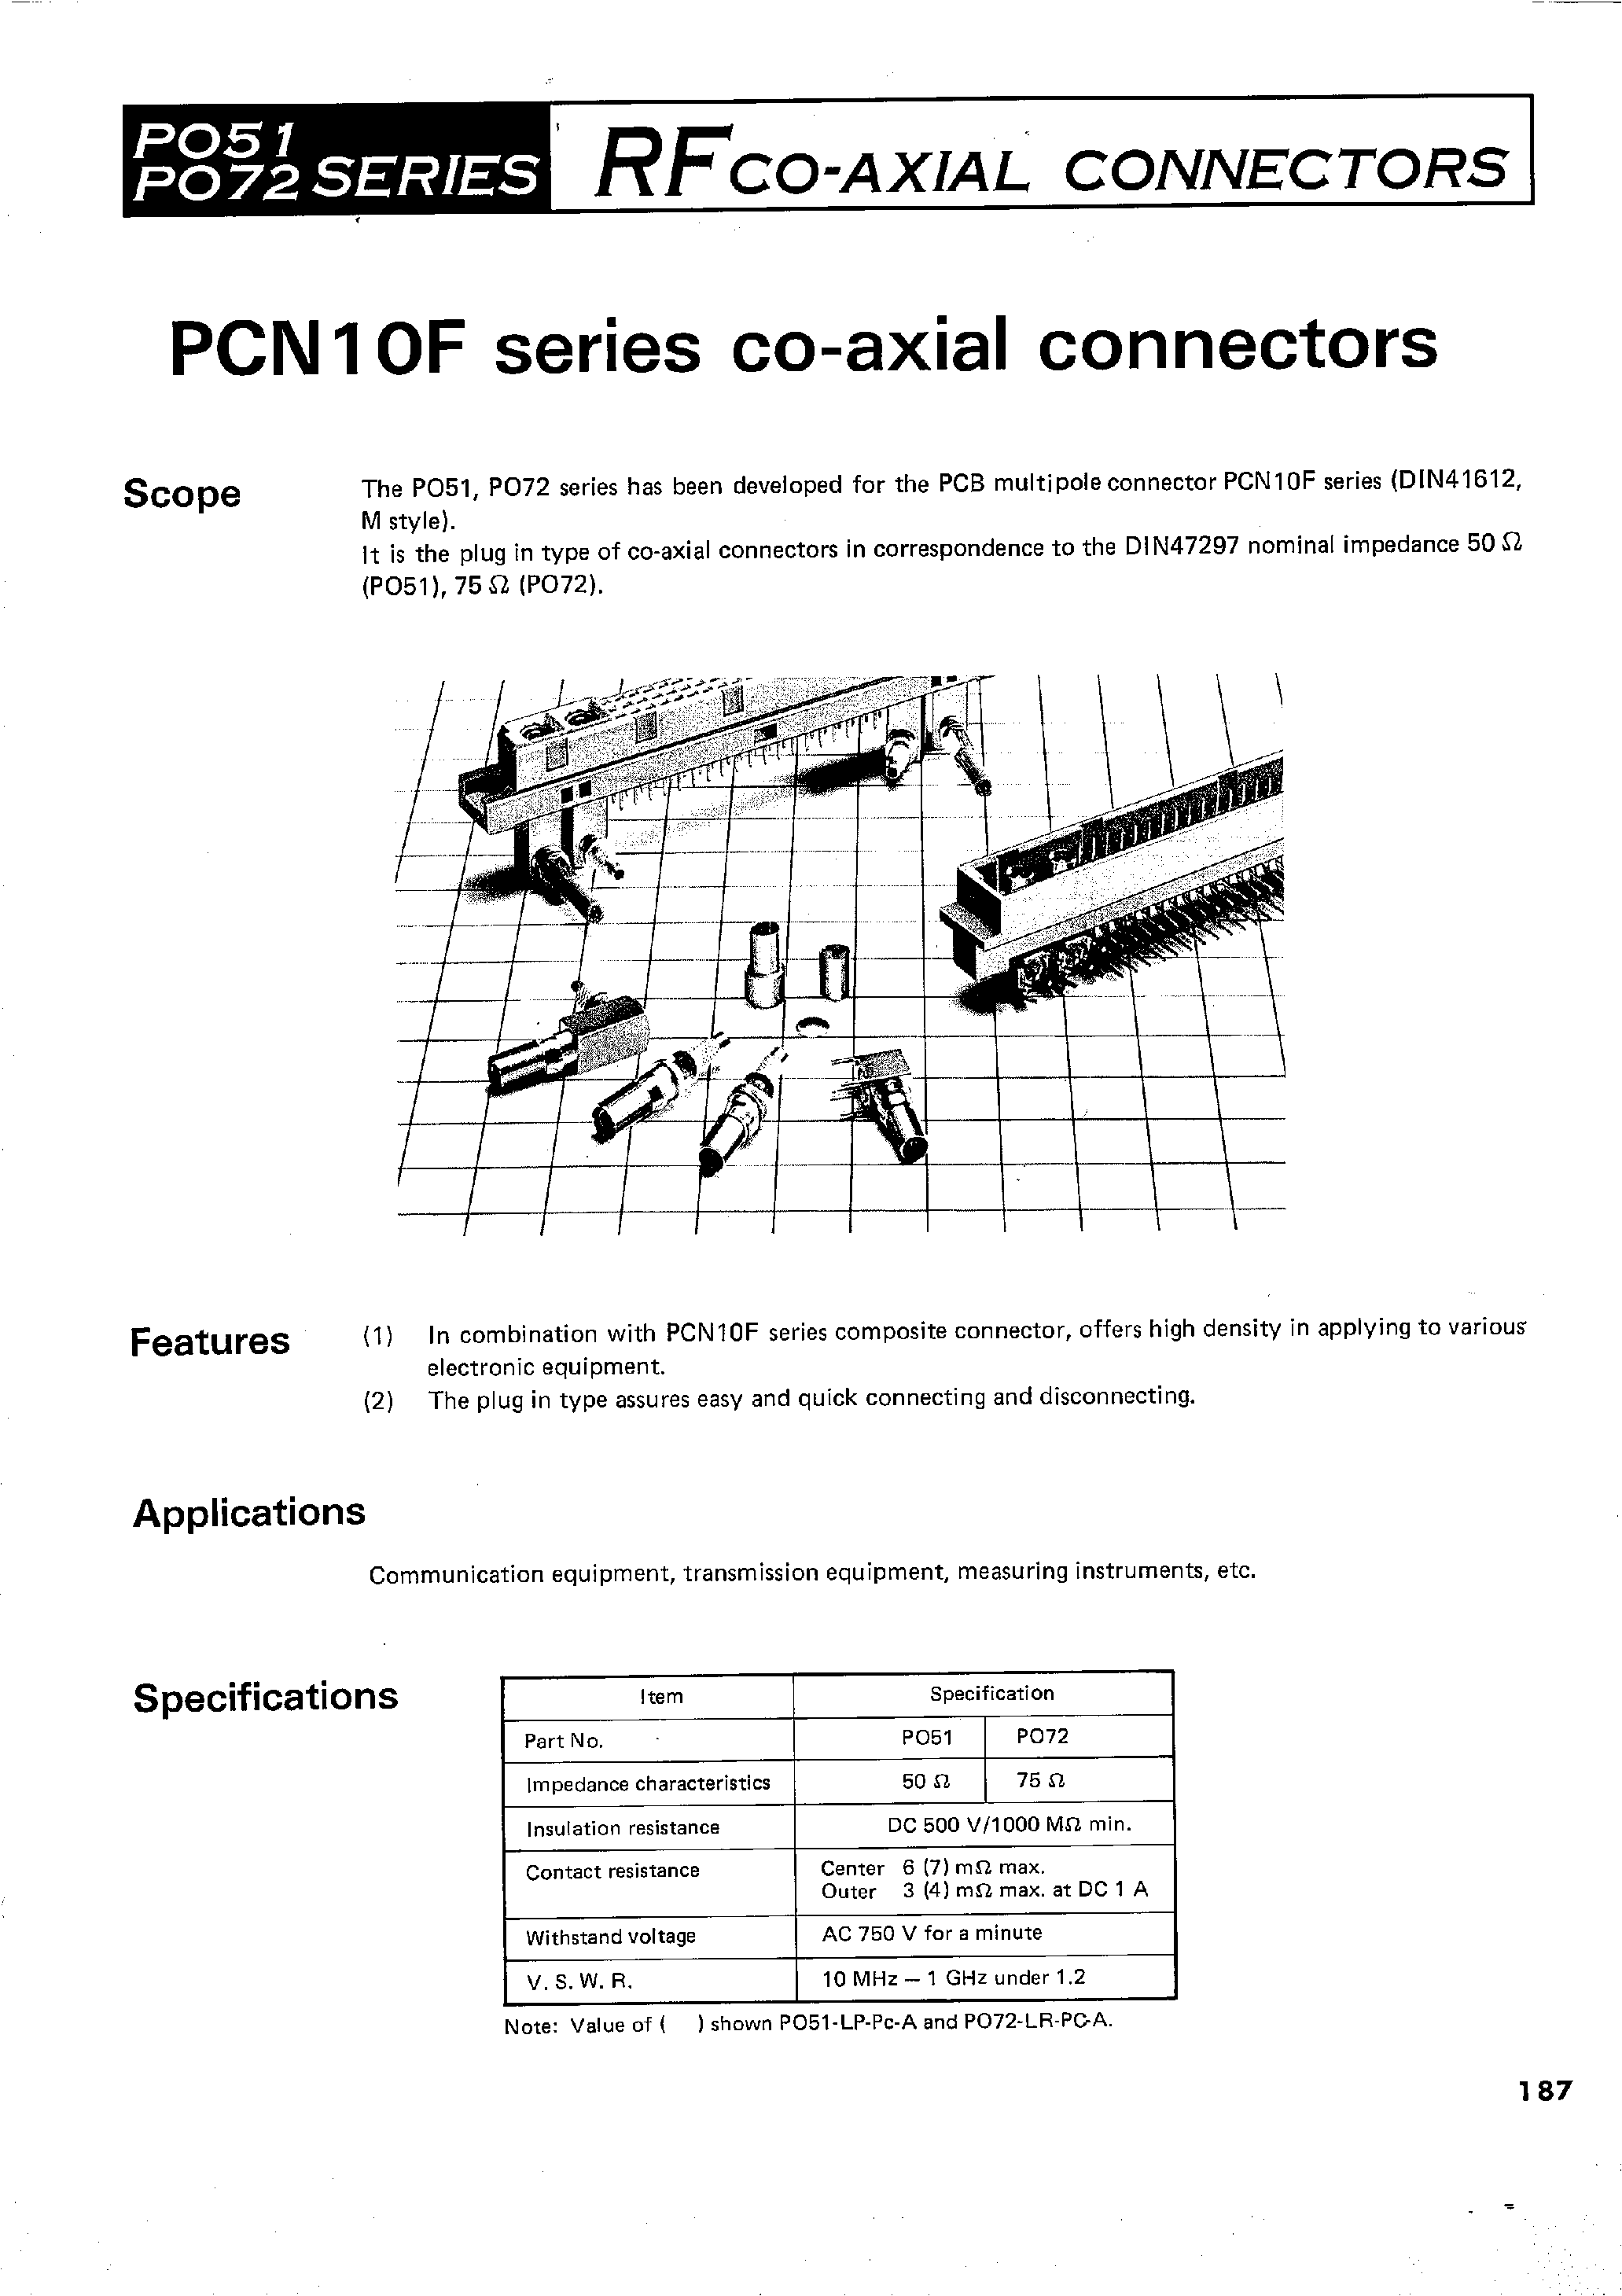 Datasheet PO51J-T-1 - RFCO-AXIAL CONNECTORS page 1